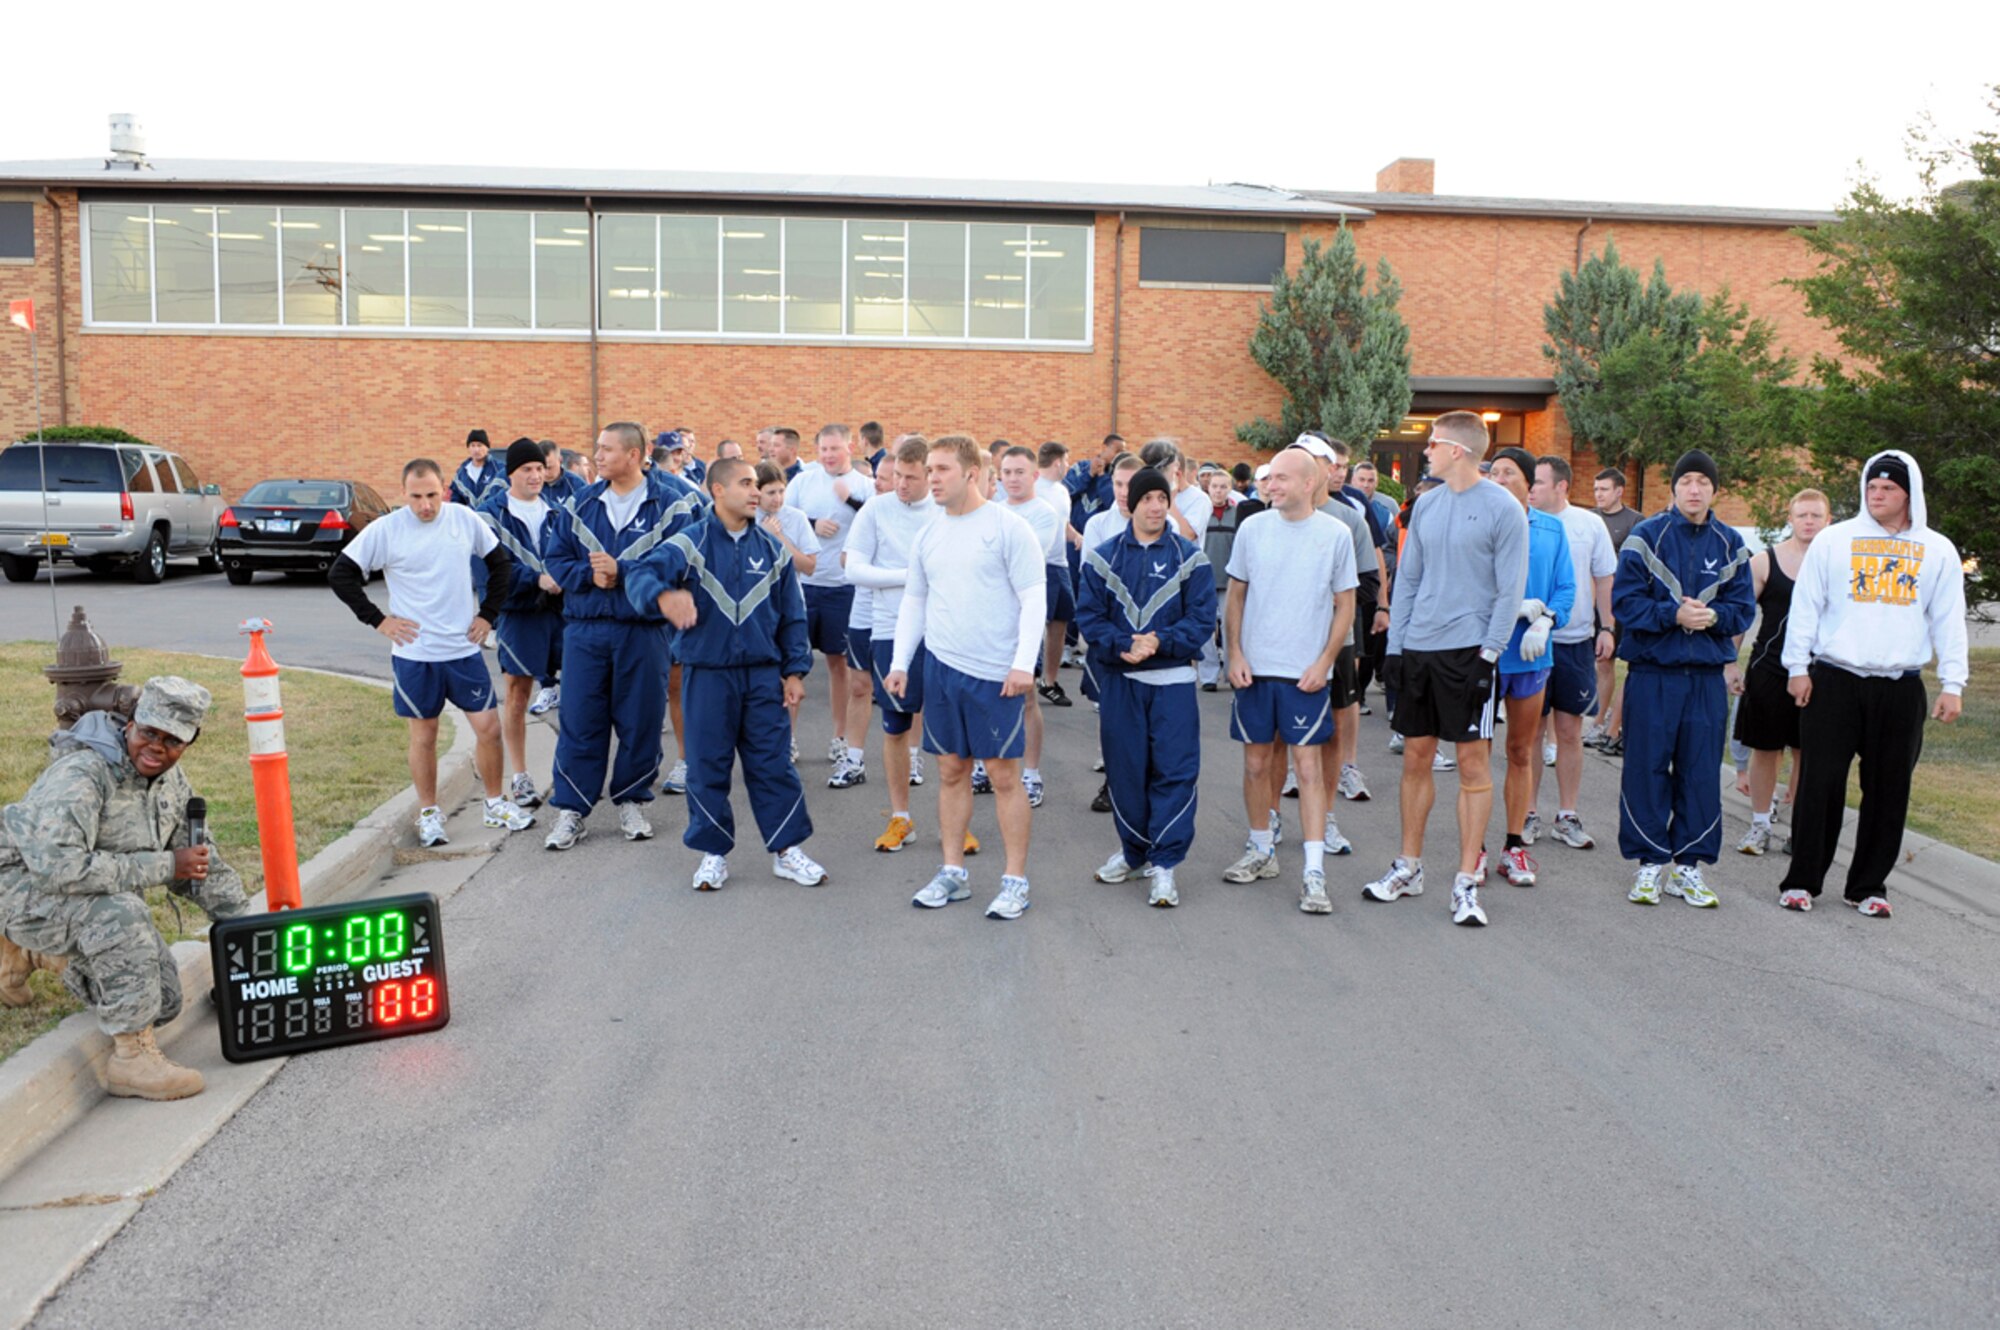 Airmen await the start of the Labor Day 5K run here, Sept. 5. The run organized by the Bellamy Fitness Center staff, provided an opportunity for Airmen on base to participate in fitness as a community. (U.S. Air Force photo/Airman 1st Class Adam Grant)
